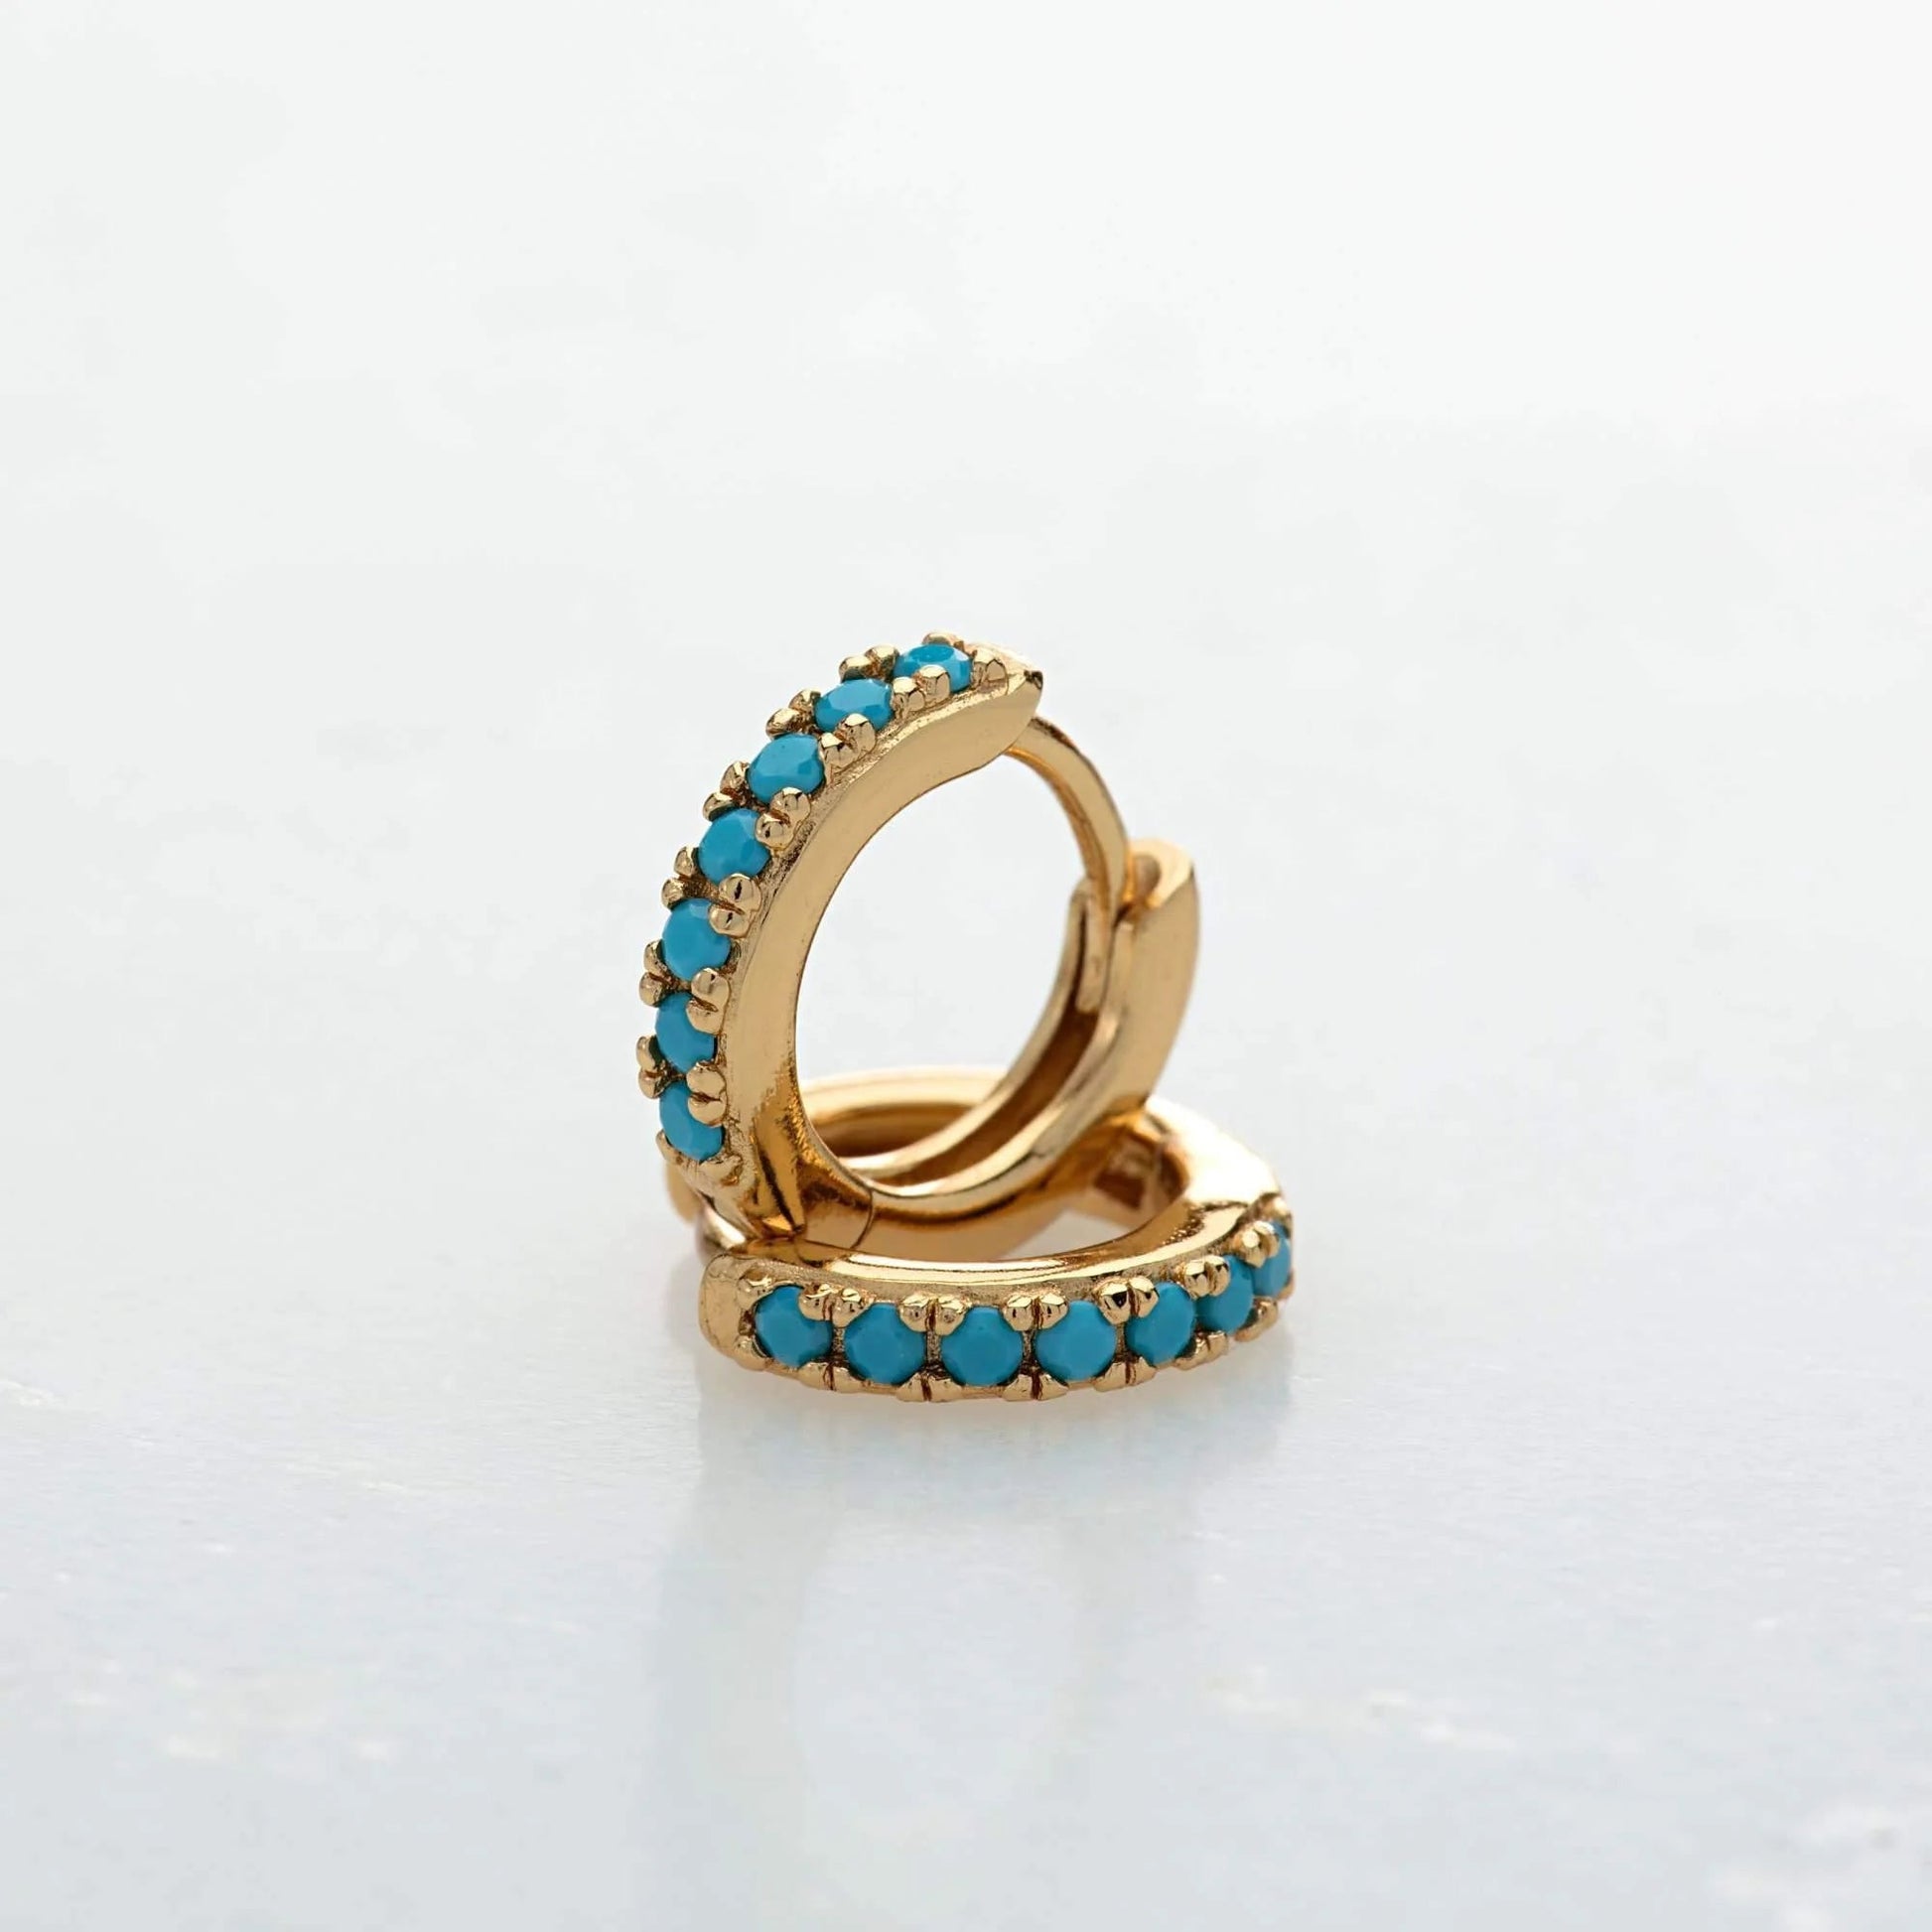 Gold Row Huggies Earrings with turquoise stones showcased on a grey background - IceGlint